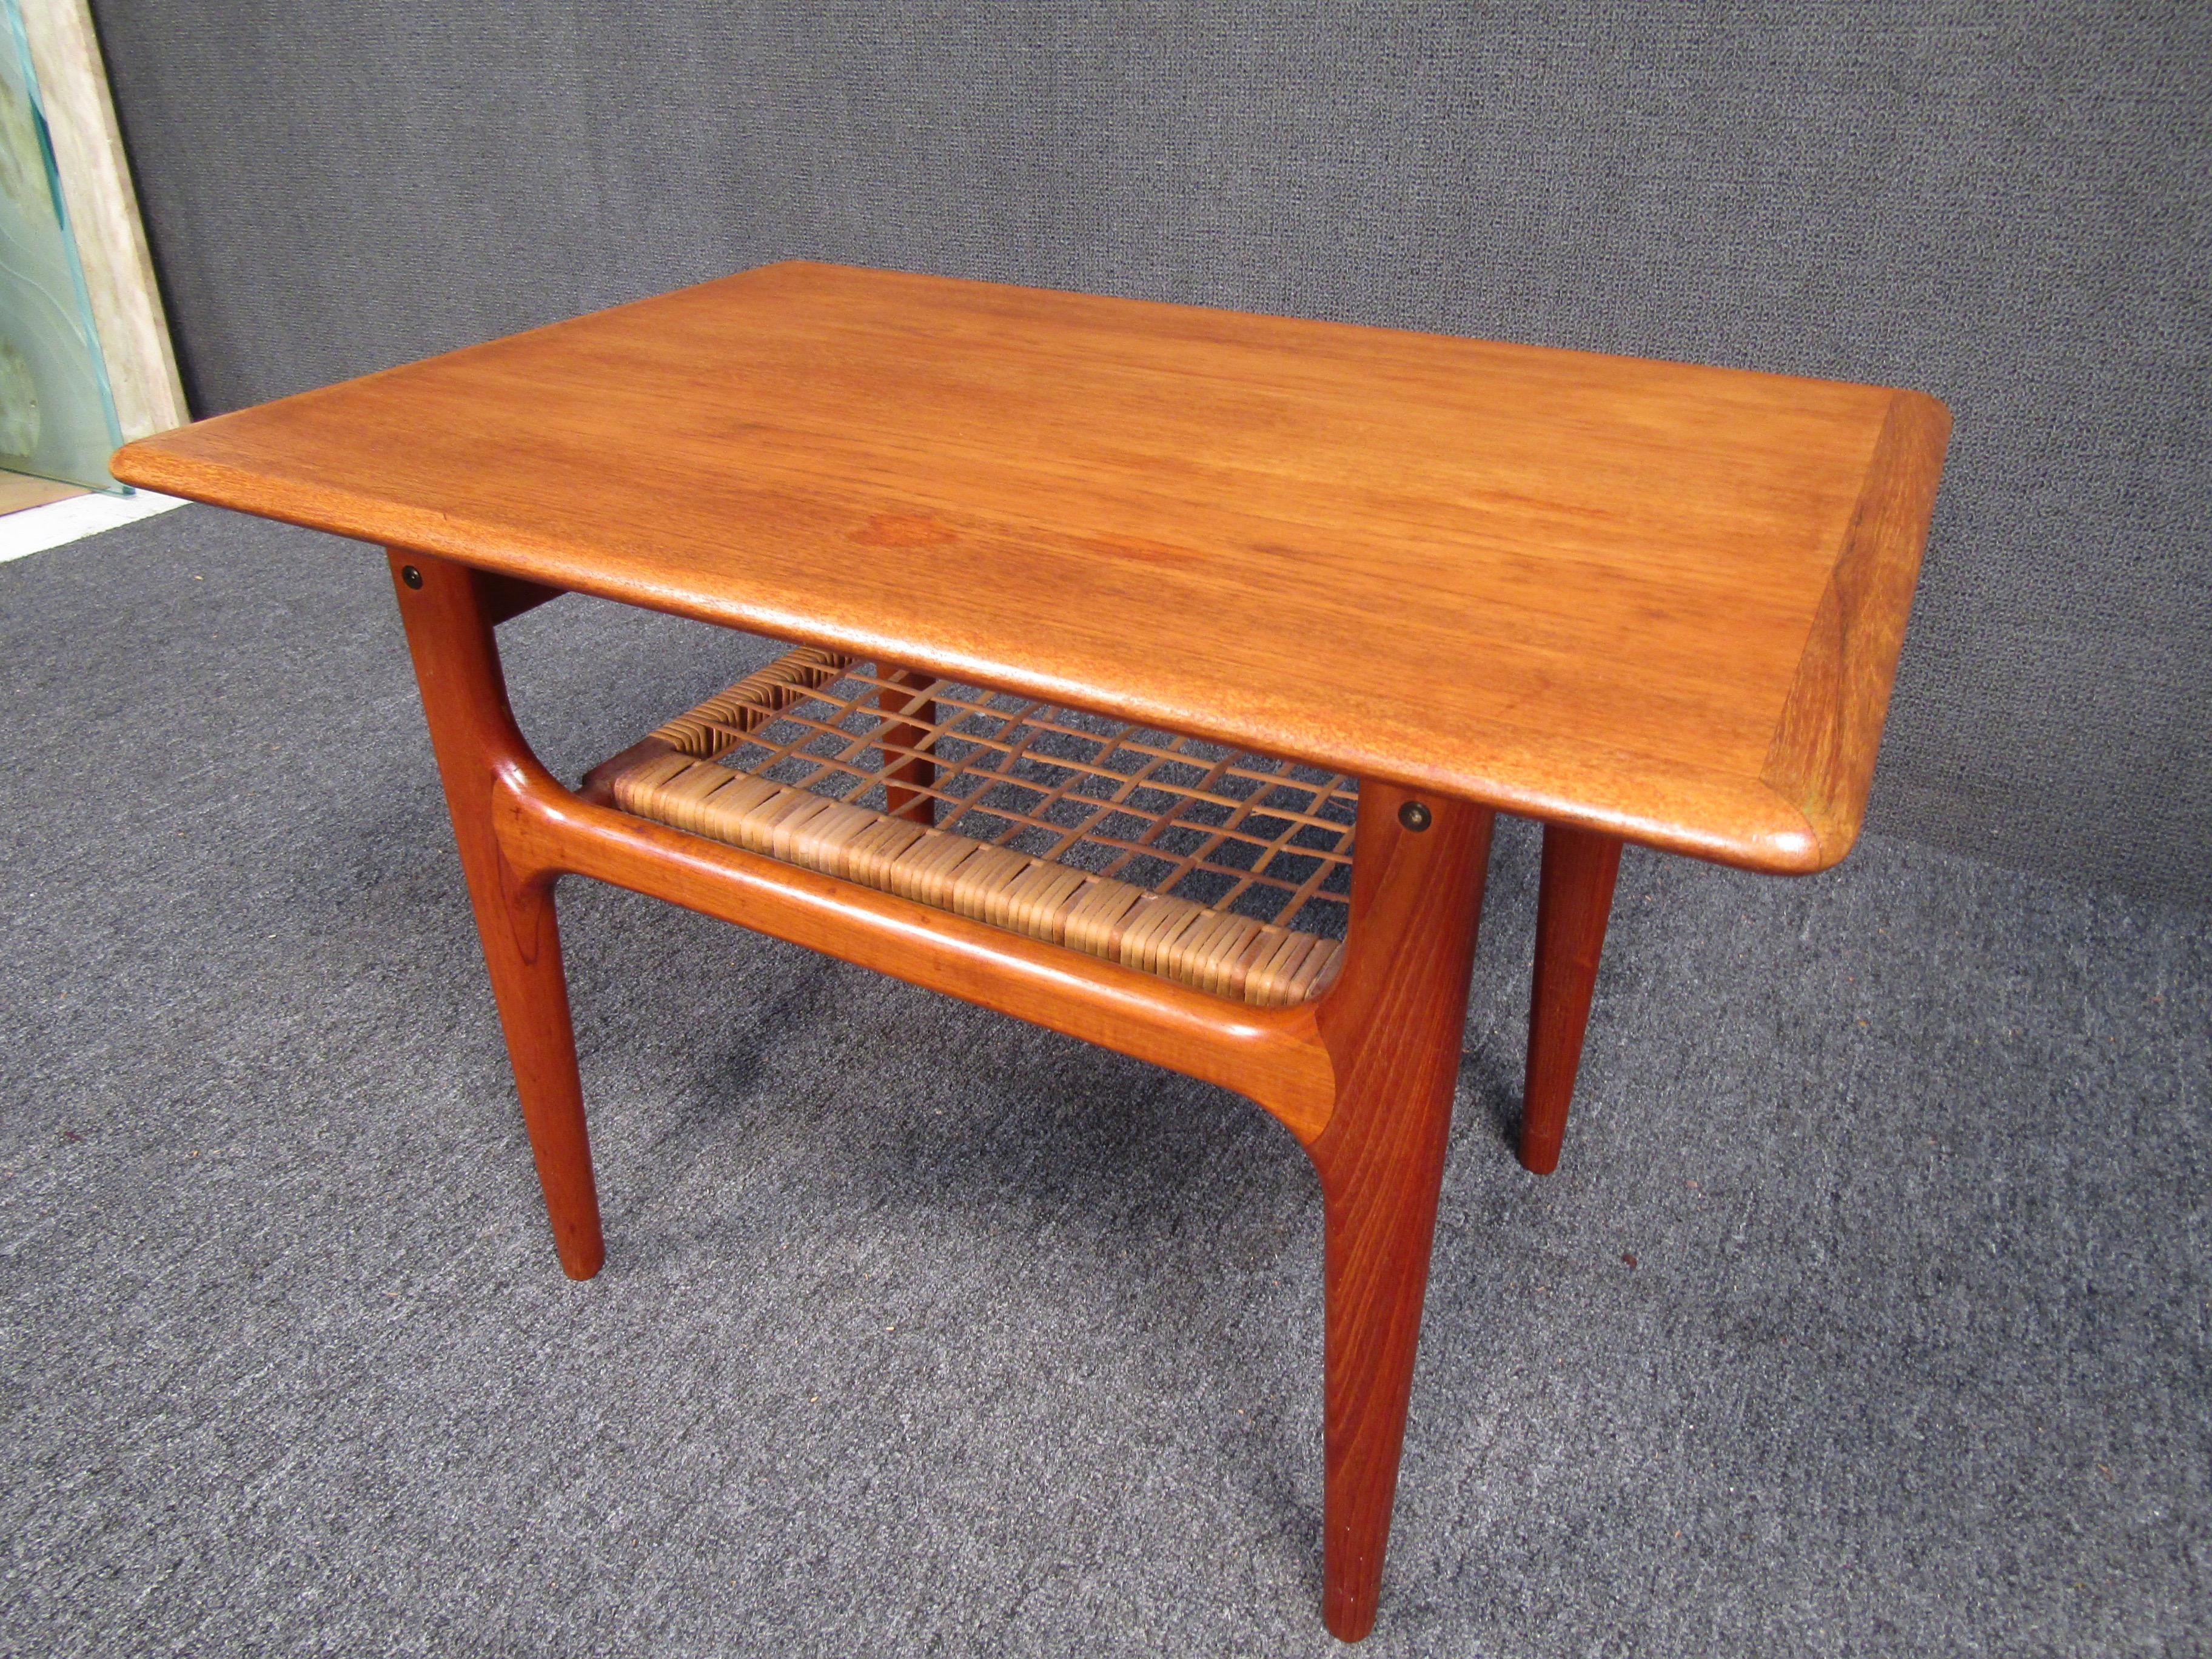 This fabulous Mid-Century Modern end table features a lower cane tier for added storage. The sleek design was made in Denmark and has elegant teak wood grain throughout. This lovely end table have smooth rounded edges and a rectangular top. A